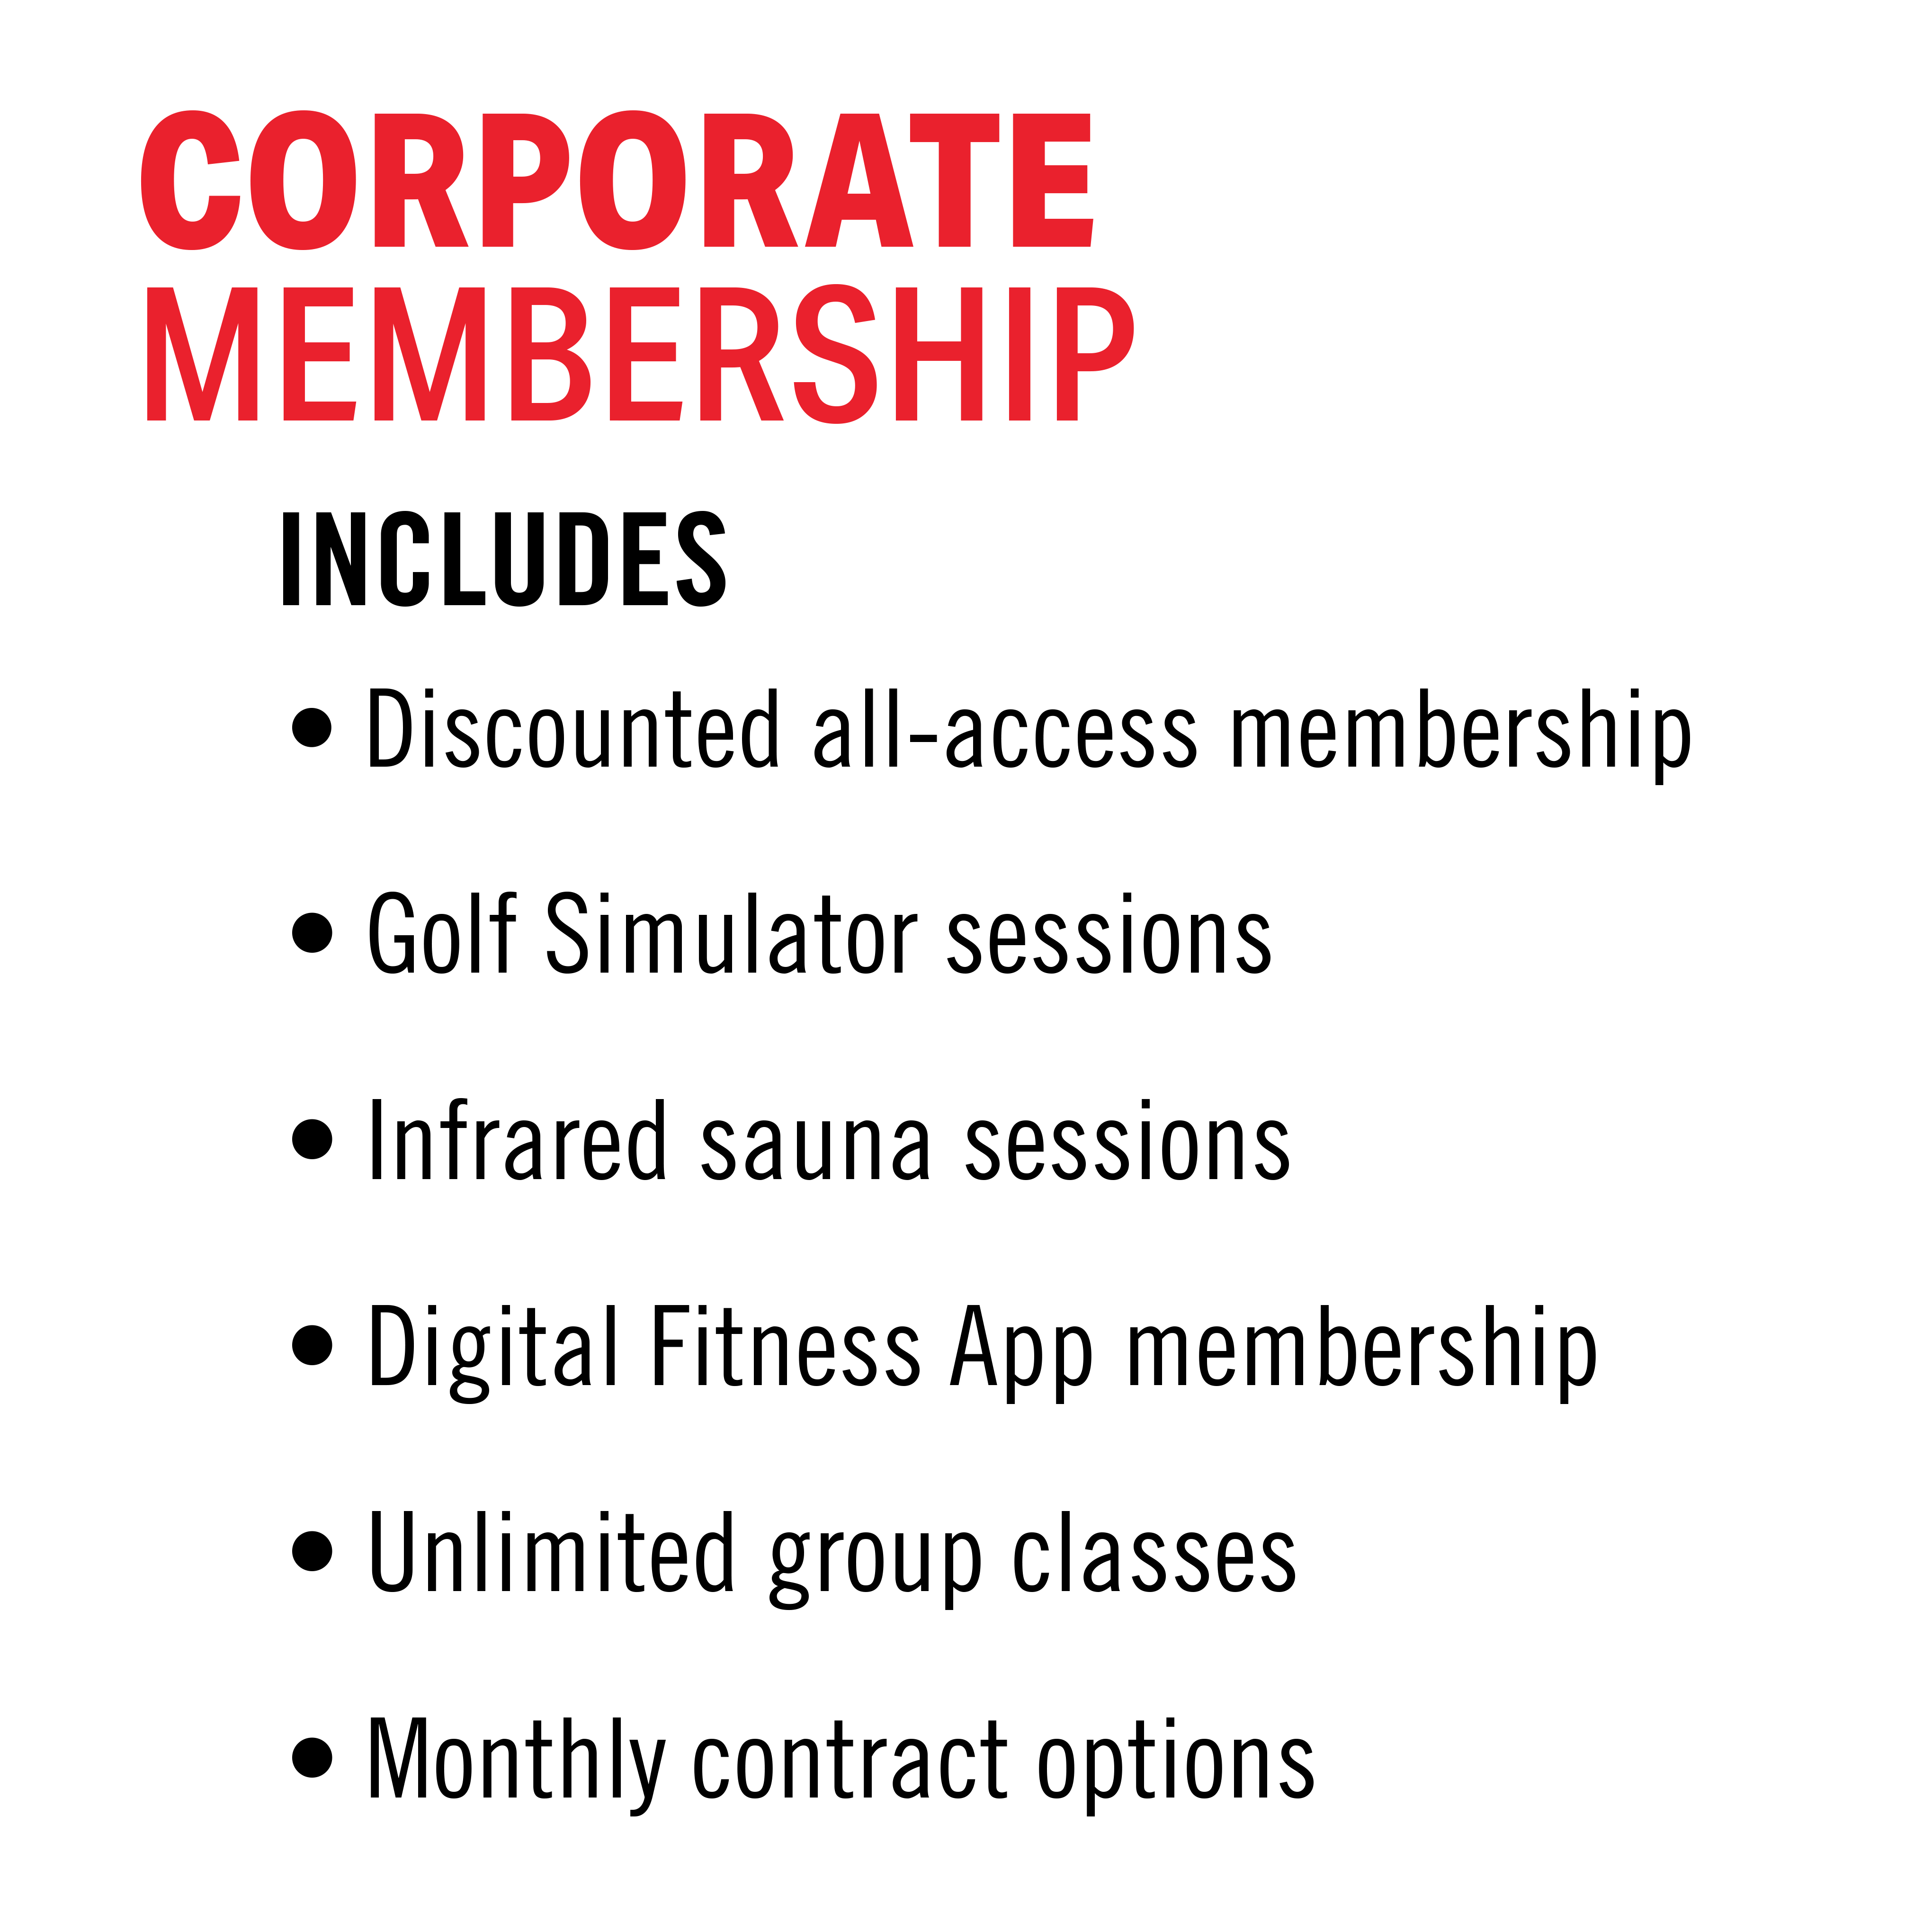 Corporate Membership includes Discounted all-access membership, Golf Simulator sessions, Infrared sauna sessions, Digital Fitness app membership, Unlimited group classes, Monthly contract options